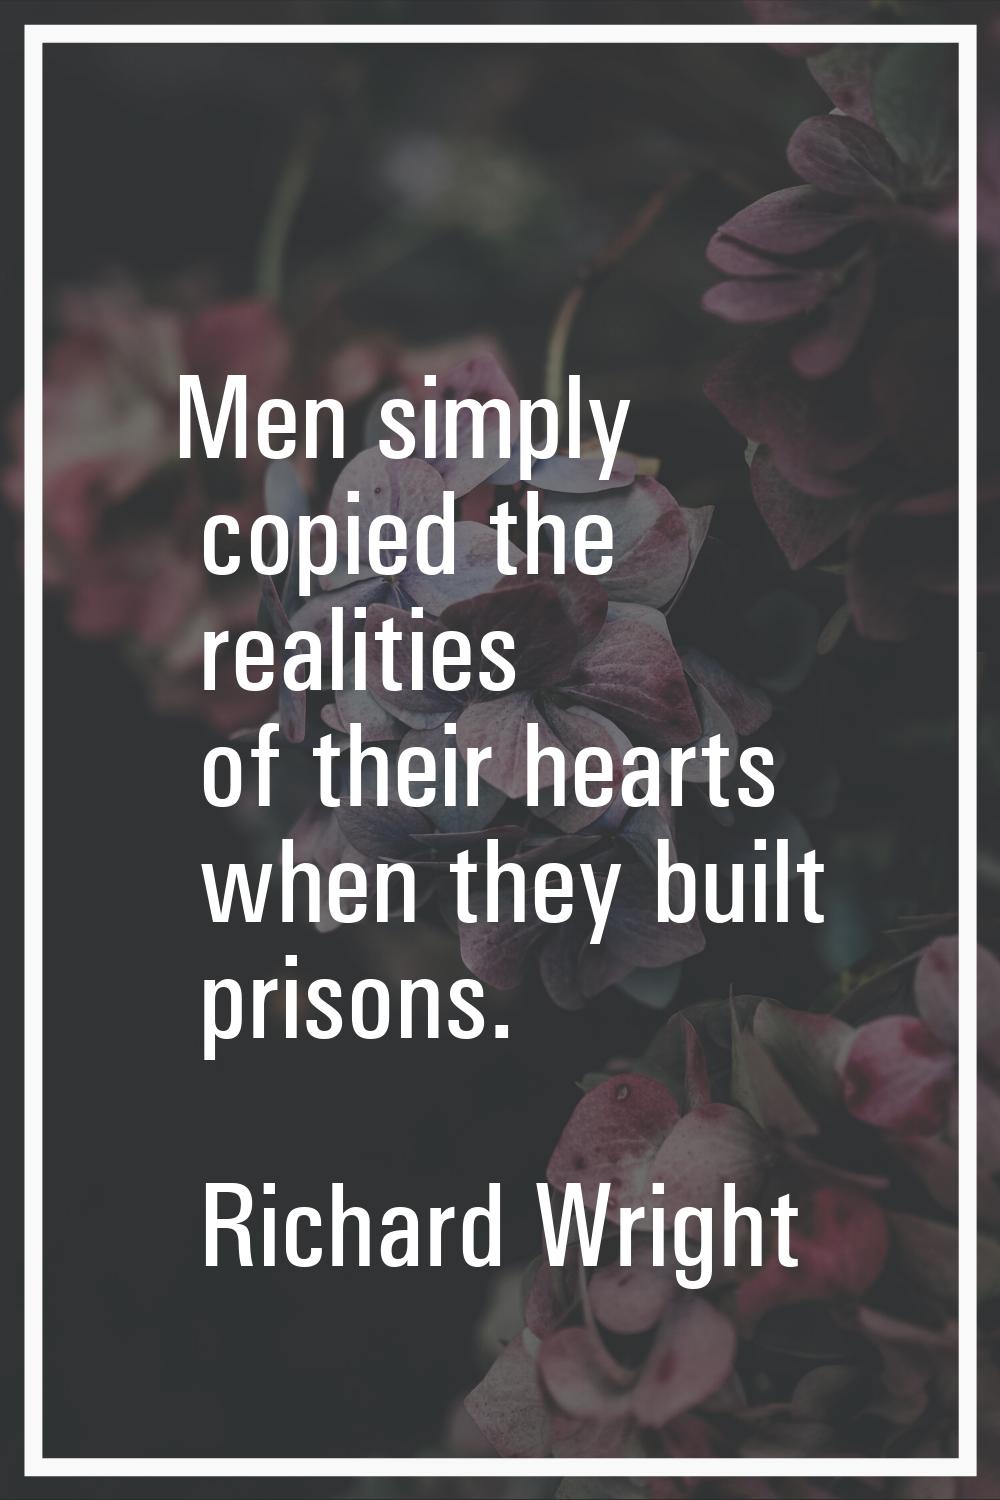 Men simply copied the realities of their hearts when they built prisons.